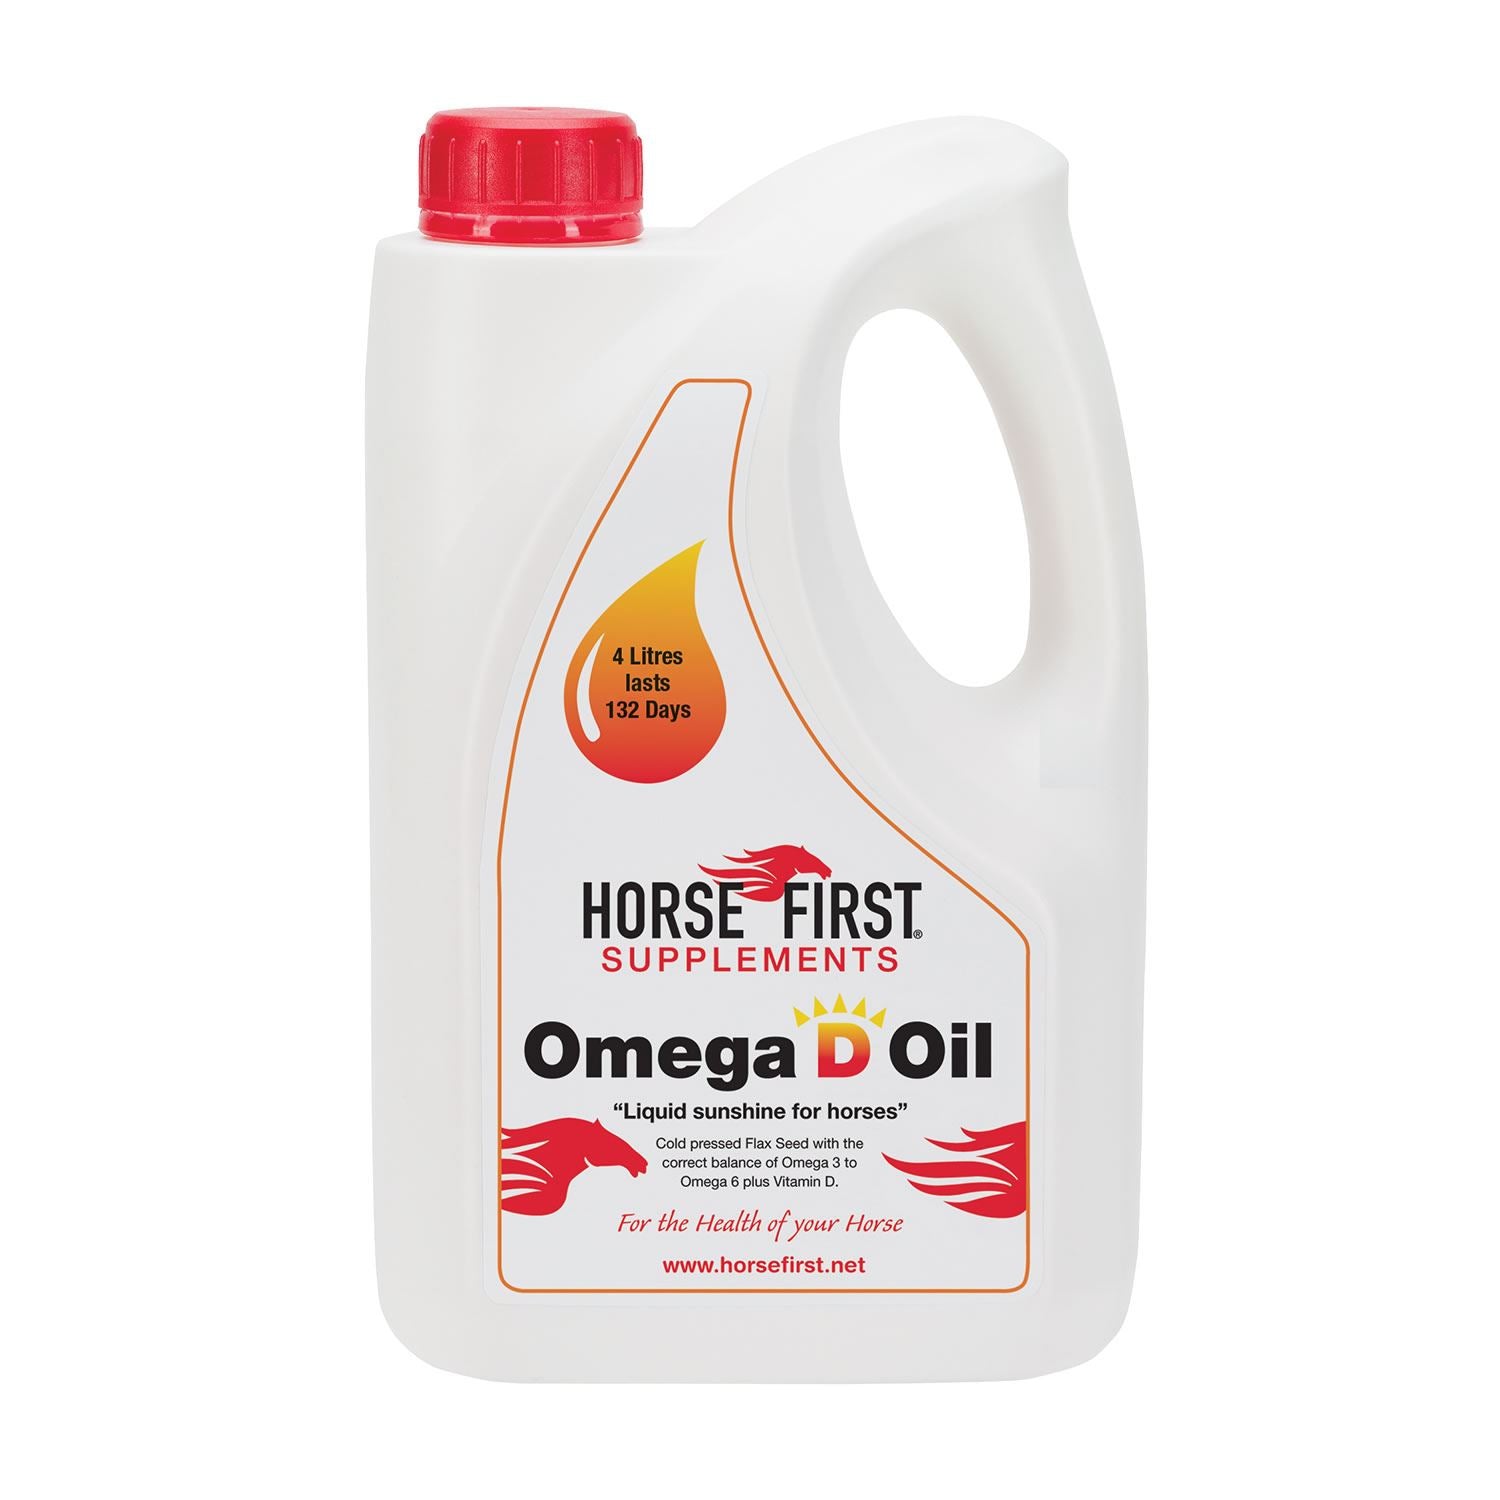 HORSE FIRST OMEGA D OIL: Cold pressed flax seed oil with added vitamin D for a shining coat